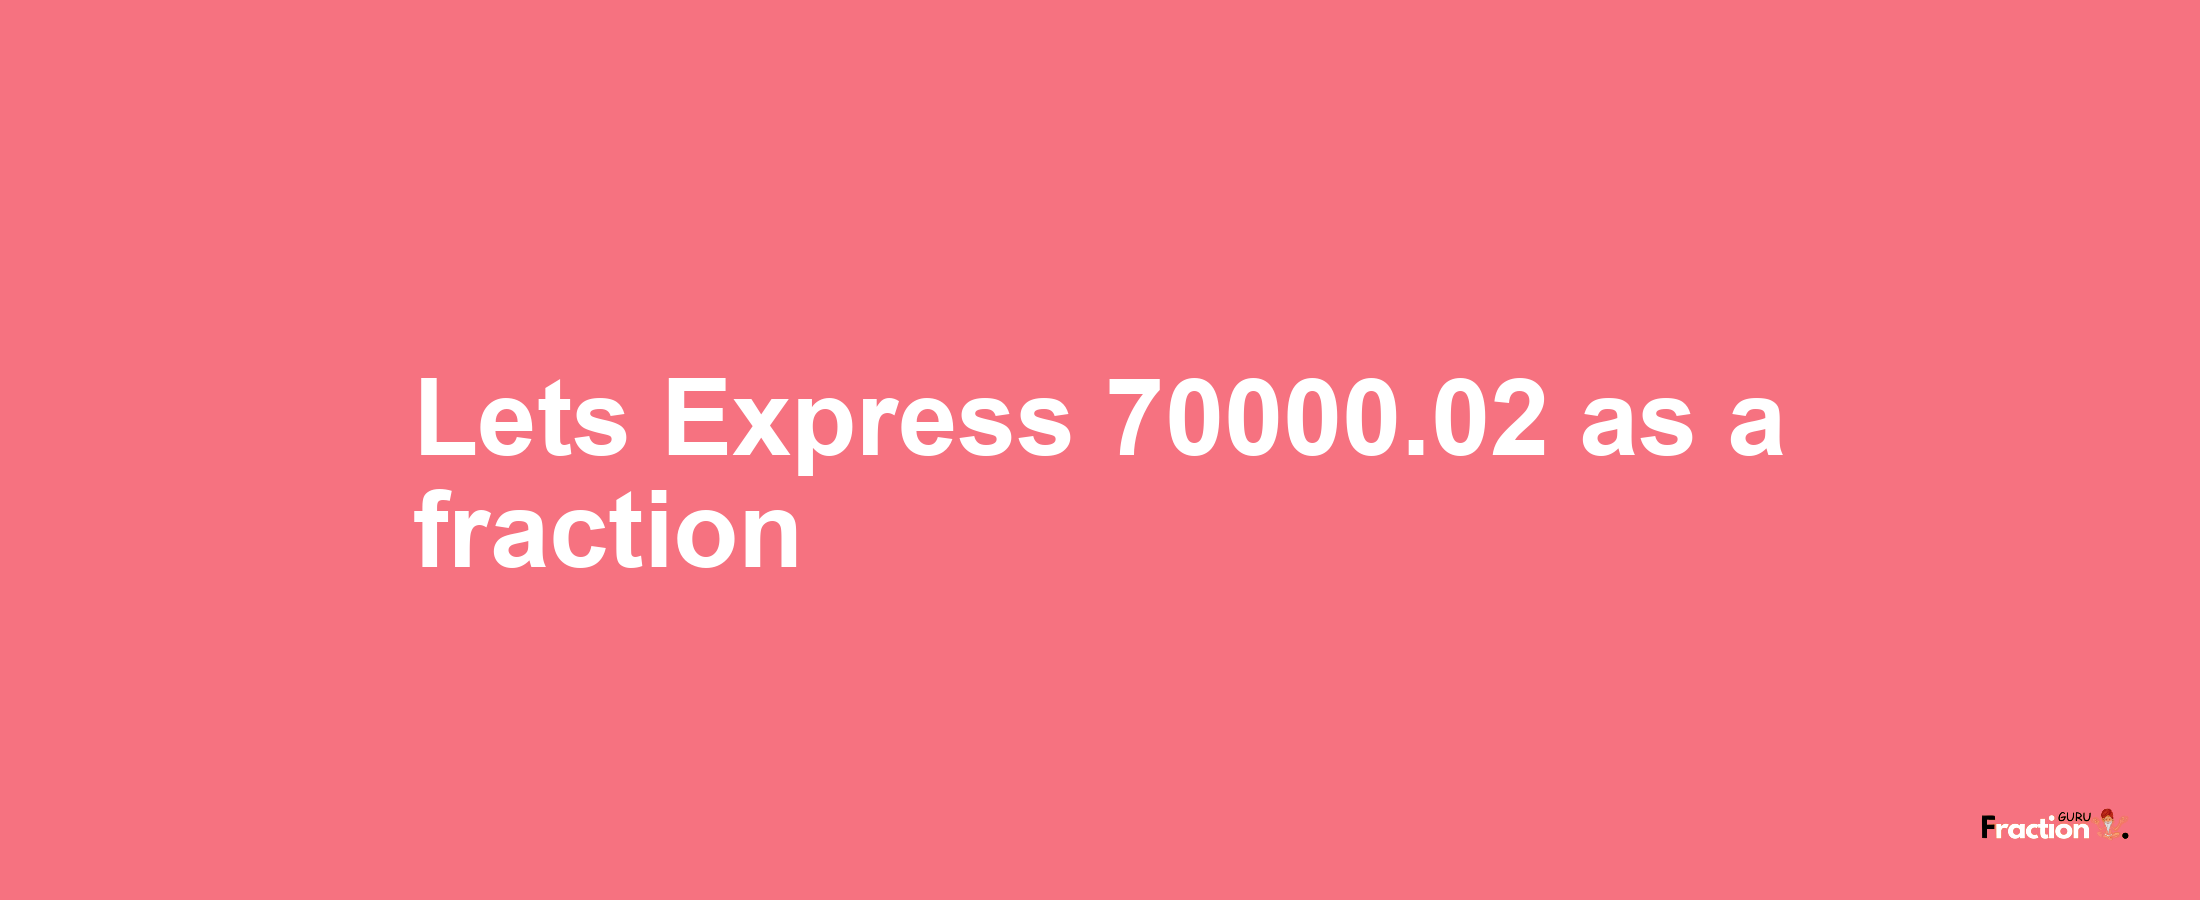 Lets Express 70000.02 as afraction